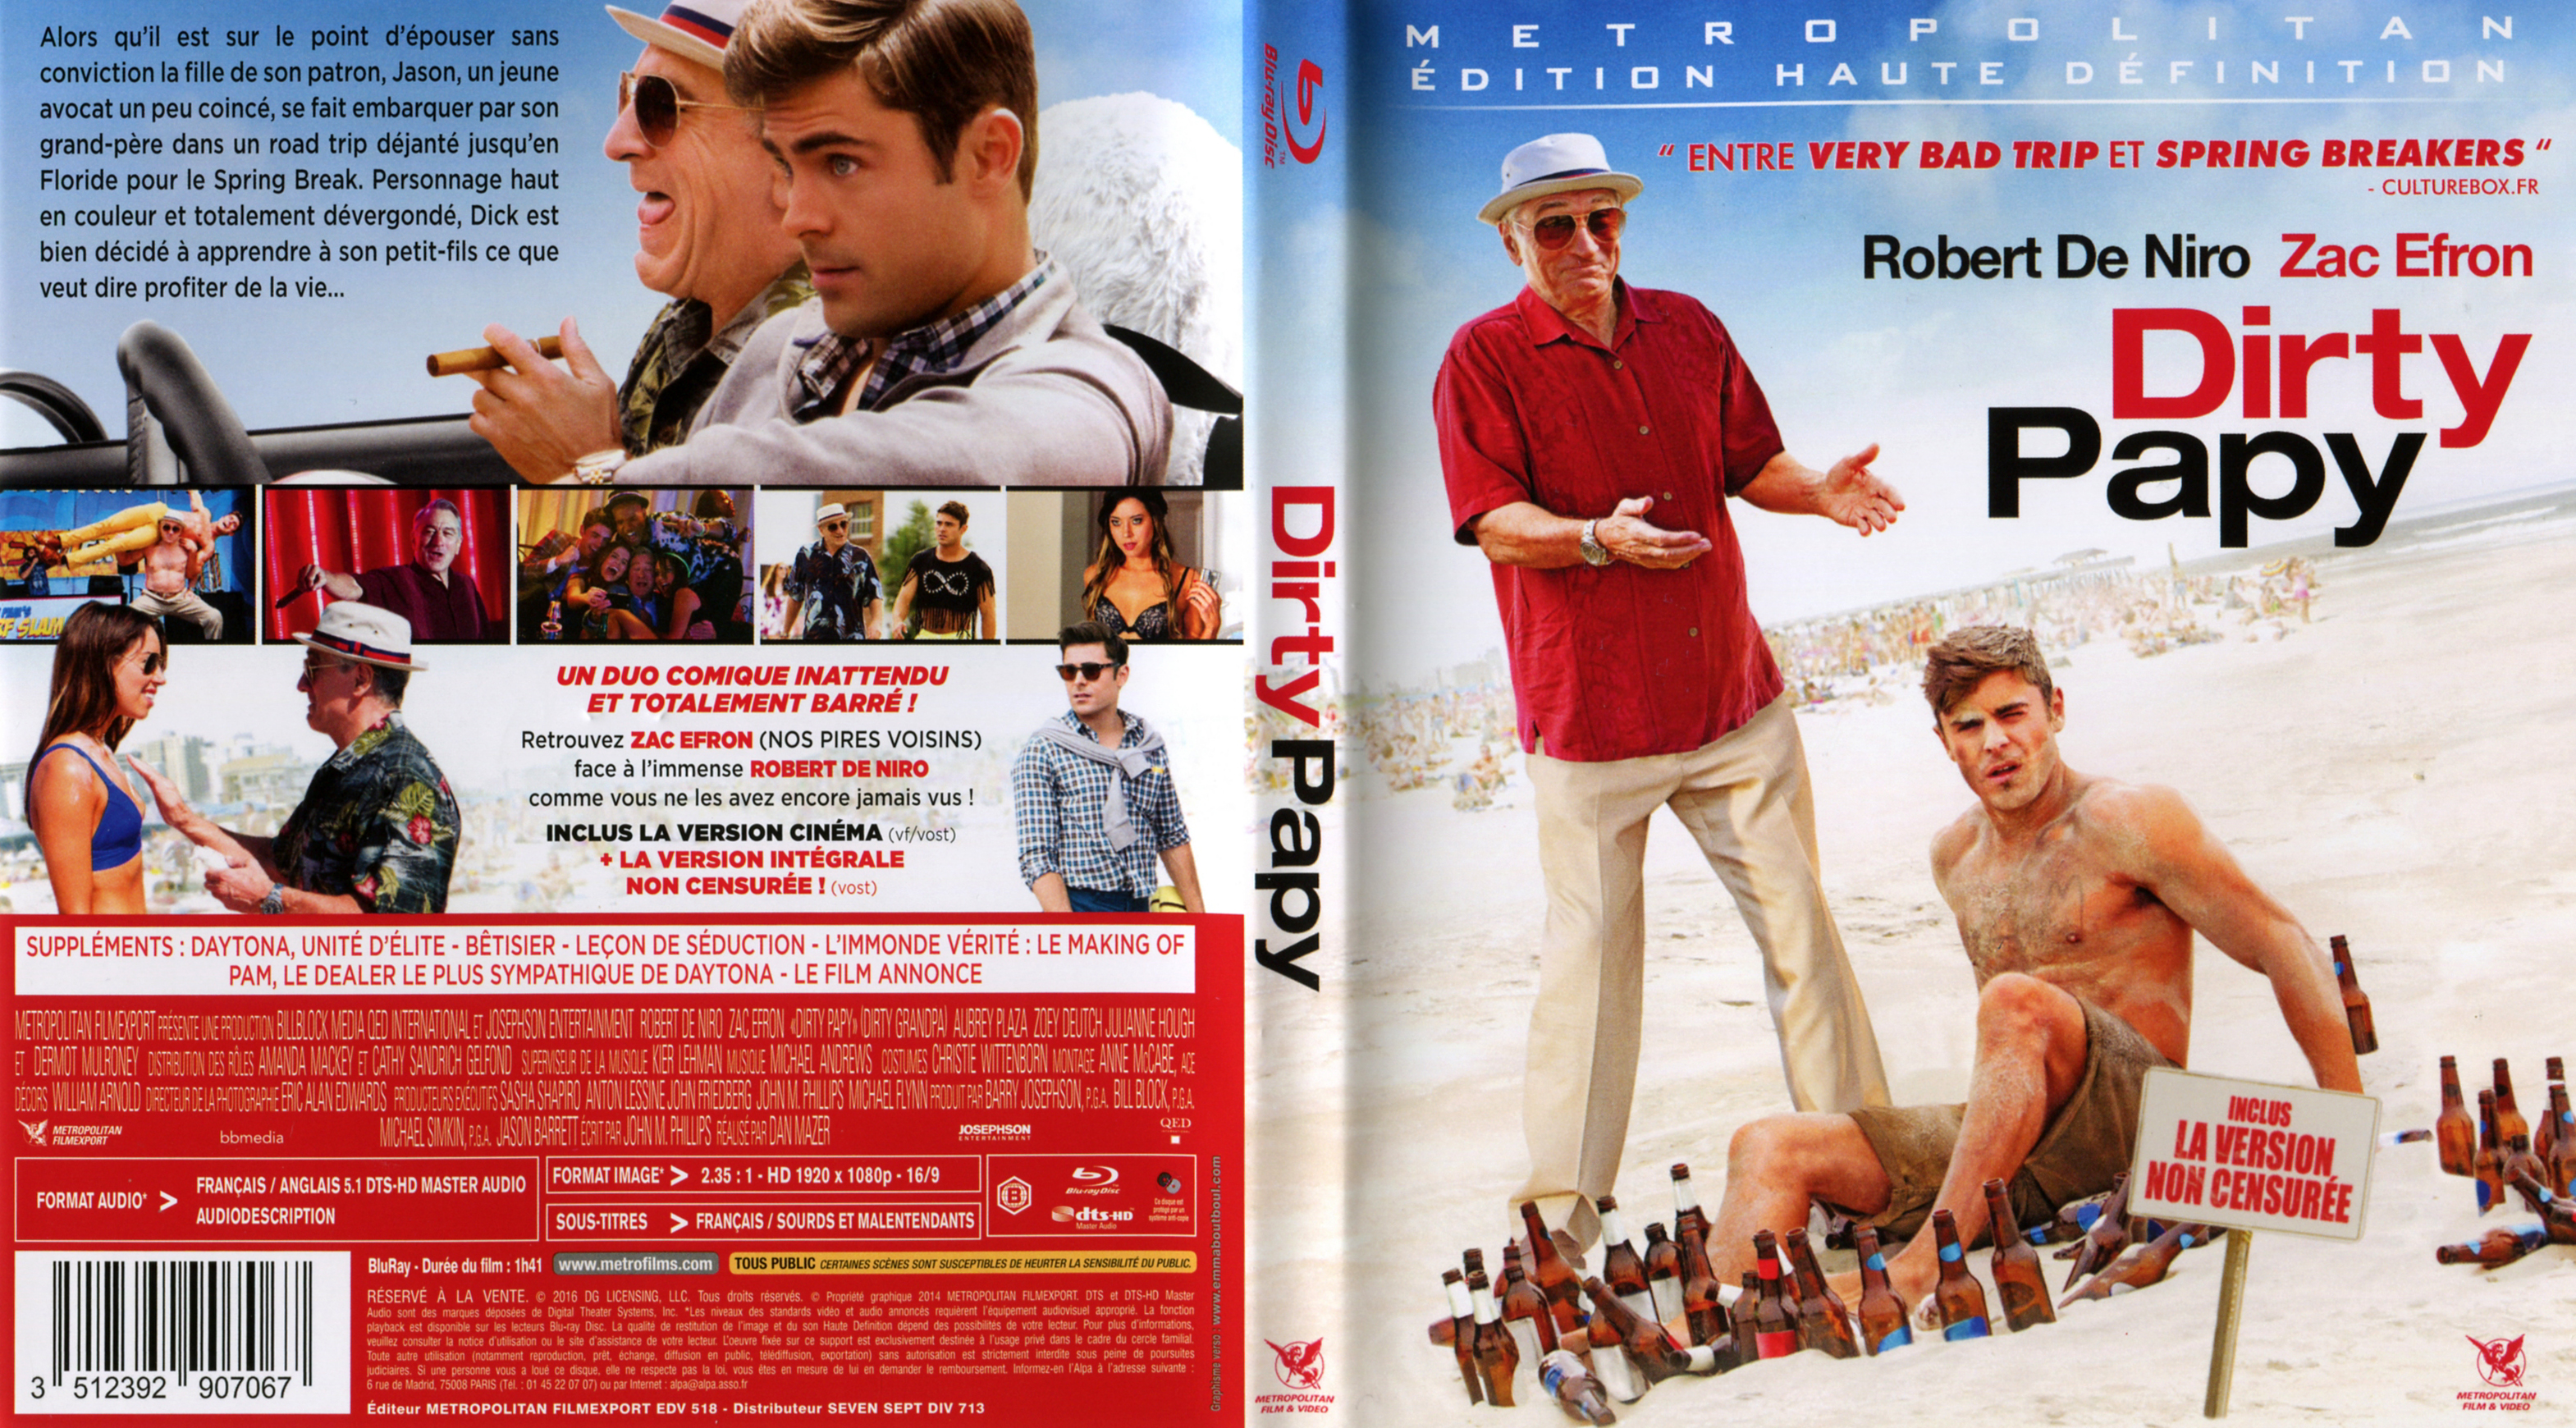 Jaquette DVD Dirty Papy (BLU-RAY)